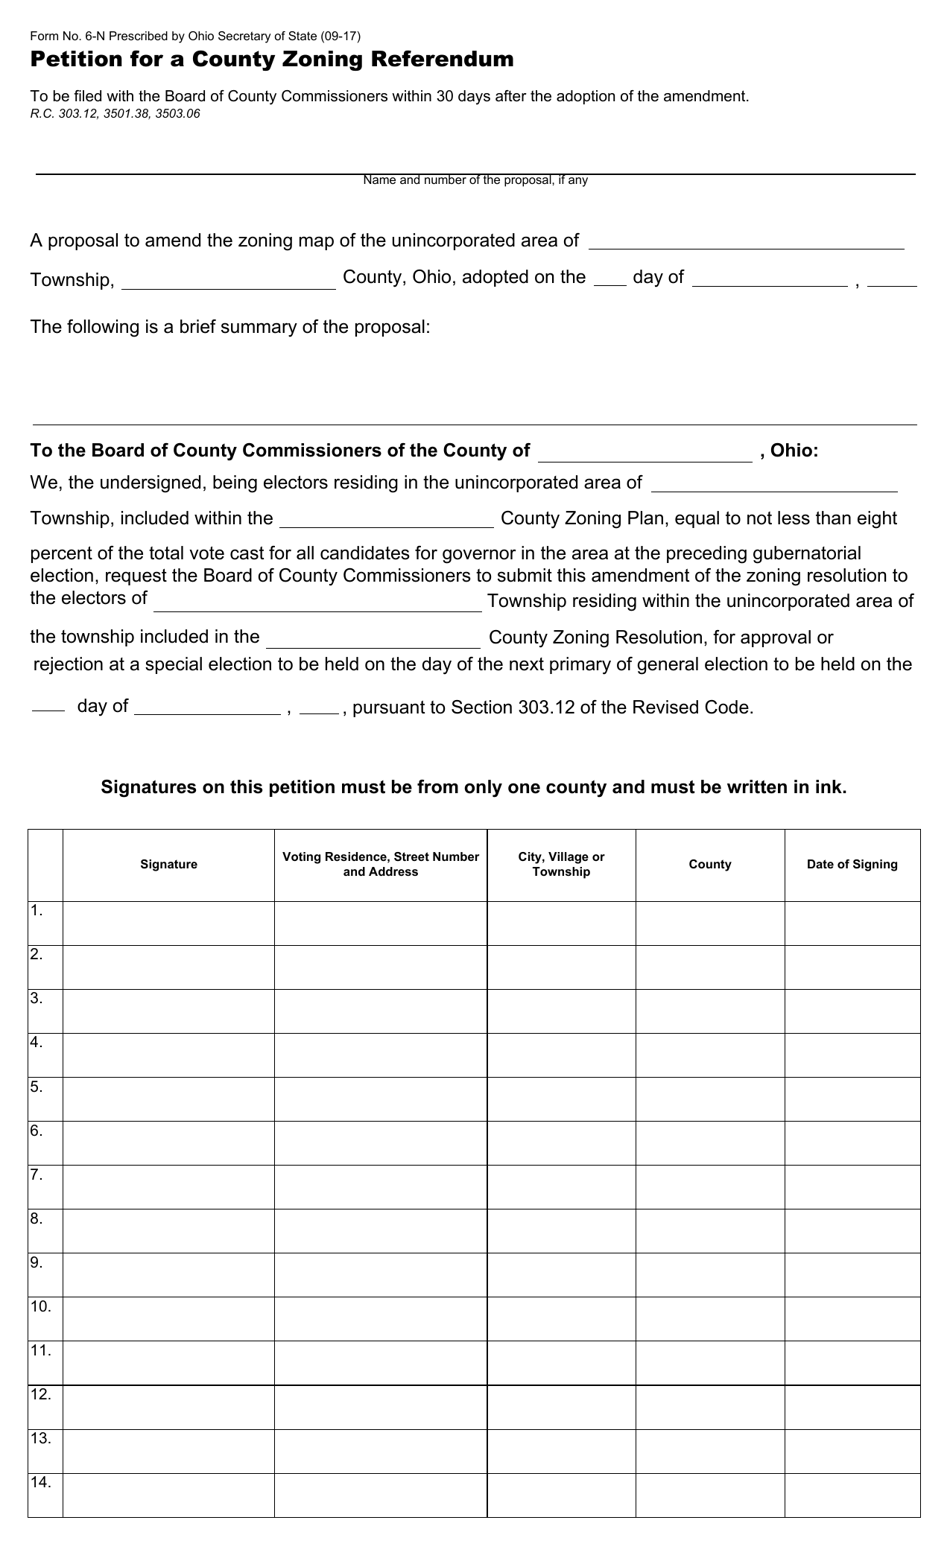 Form 6-N Petition for a County Zoning Referendum - Ohio, Page 1